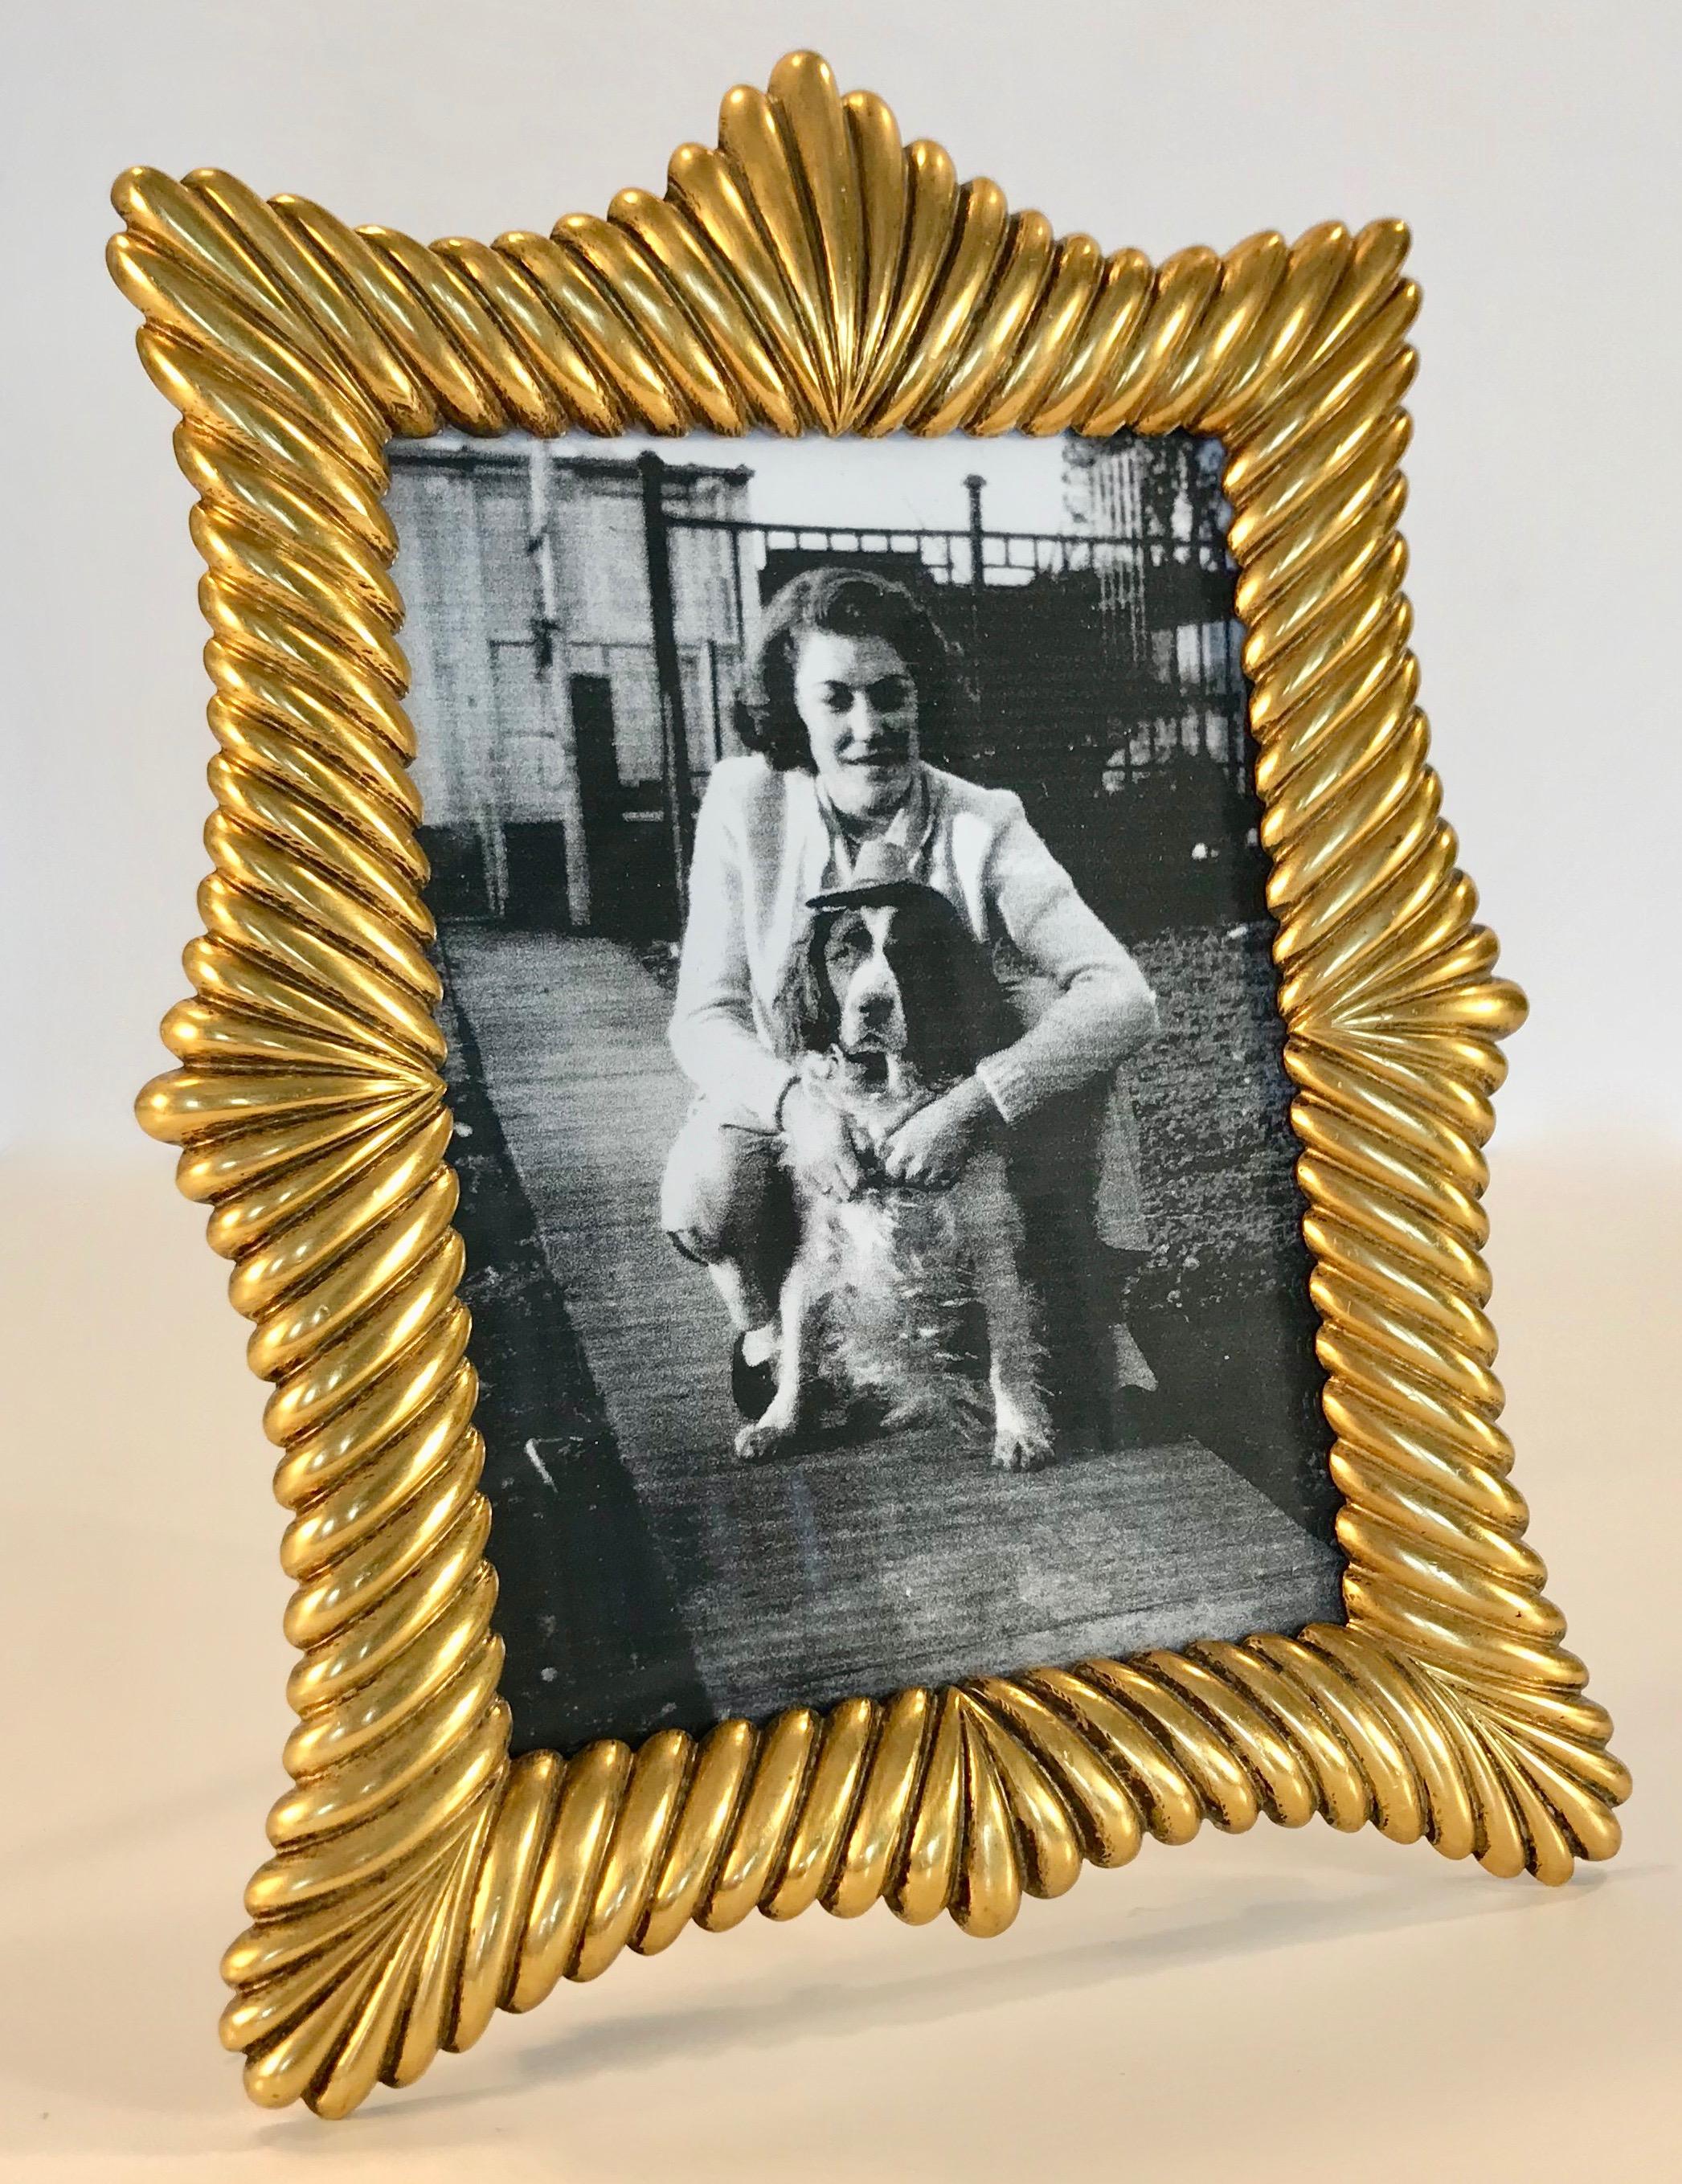 Beautiful French gilt bronze picture frame in Belle Époque style. Very well crafted and weighty, this frame has a beautiful warm d'oré gilt finish with a lovely patina. Original condition with easel back. 

Measures: 7.5